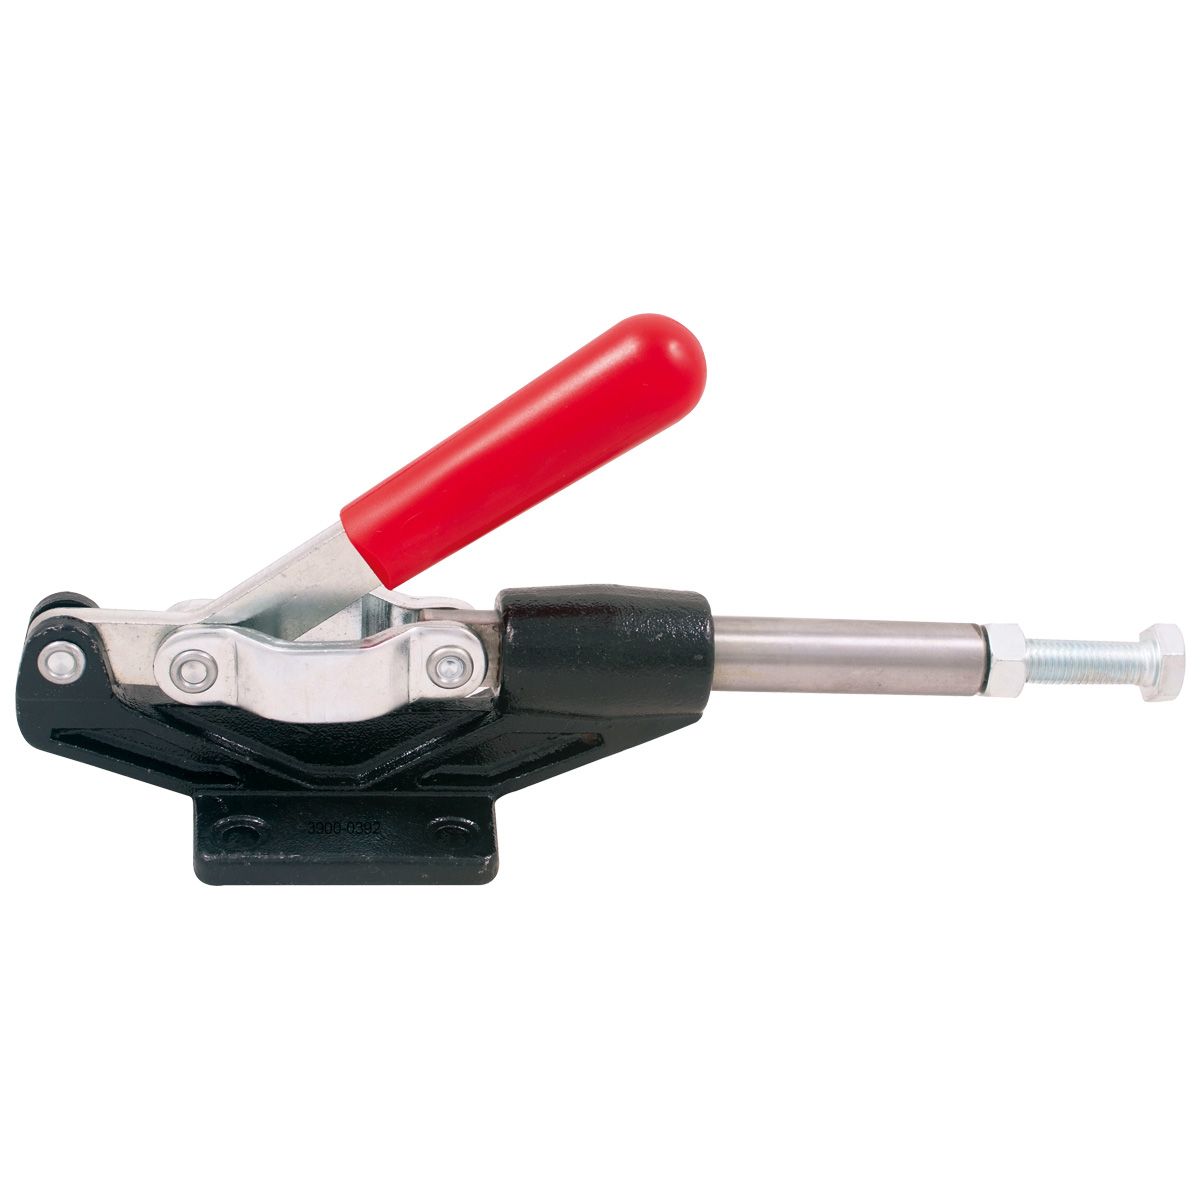 PUSH & PULL CLAMP WITH 45 DEGREE HANDLE & 800 LBS HOLDING CAPACITY  (3900-0390)